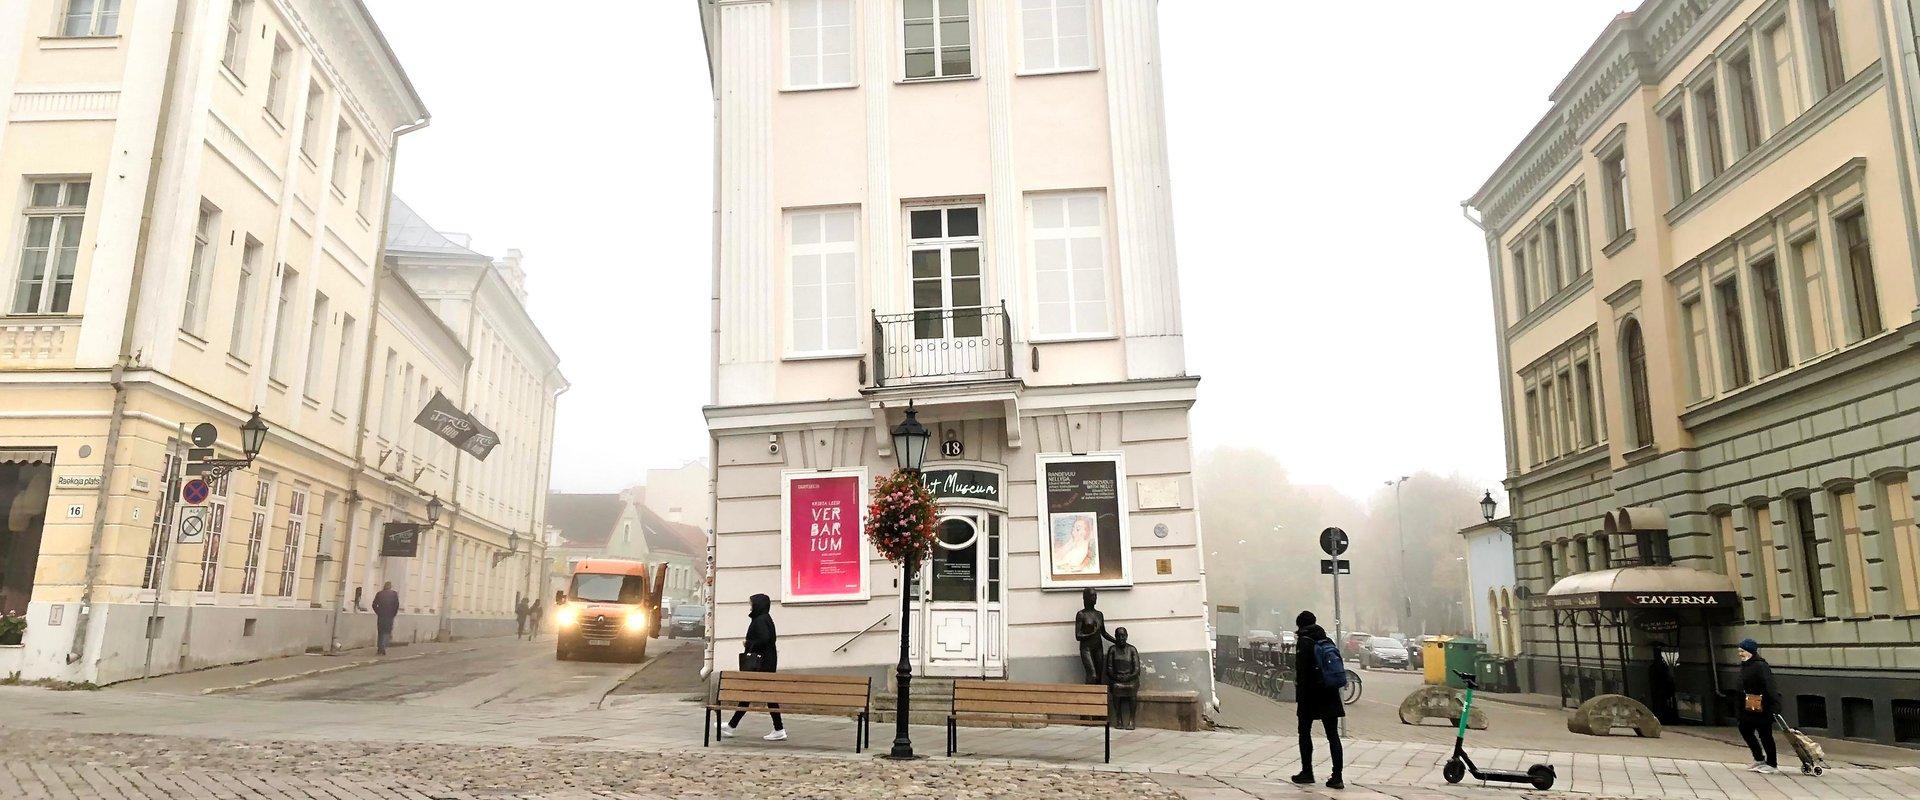 The Leaning House of Tartu